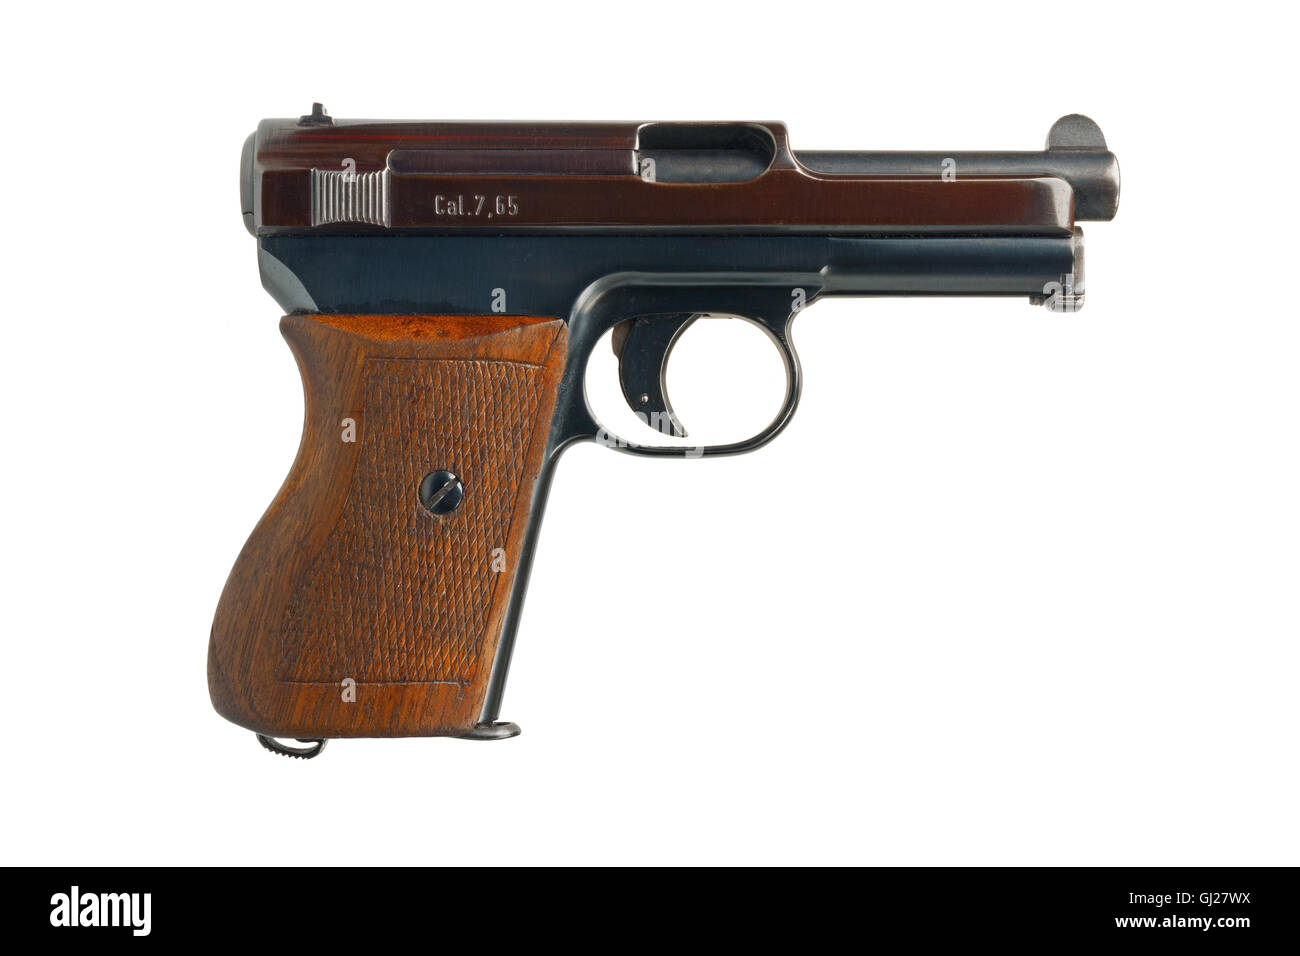 A German 7.65mm semi-automatic pocket pistol from 1934. Stock Photo